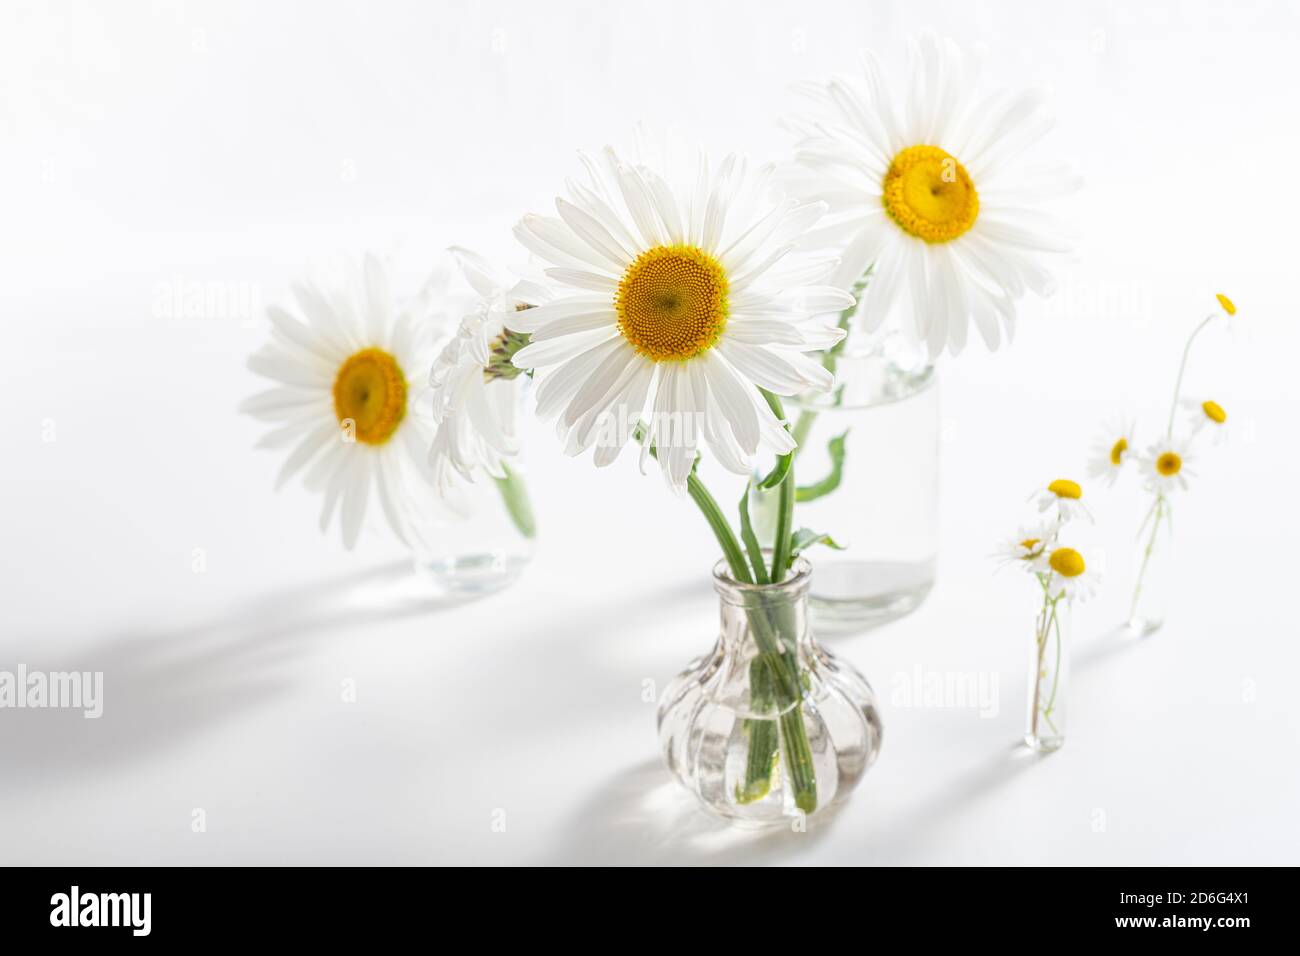 Beautiful chamomiles flowers in glass vases on white background. Floral composition in home interior. Spring and summer daisy flowers Stock Photo